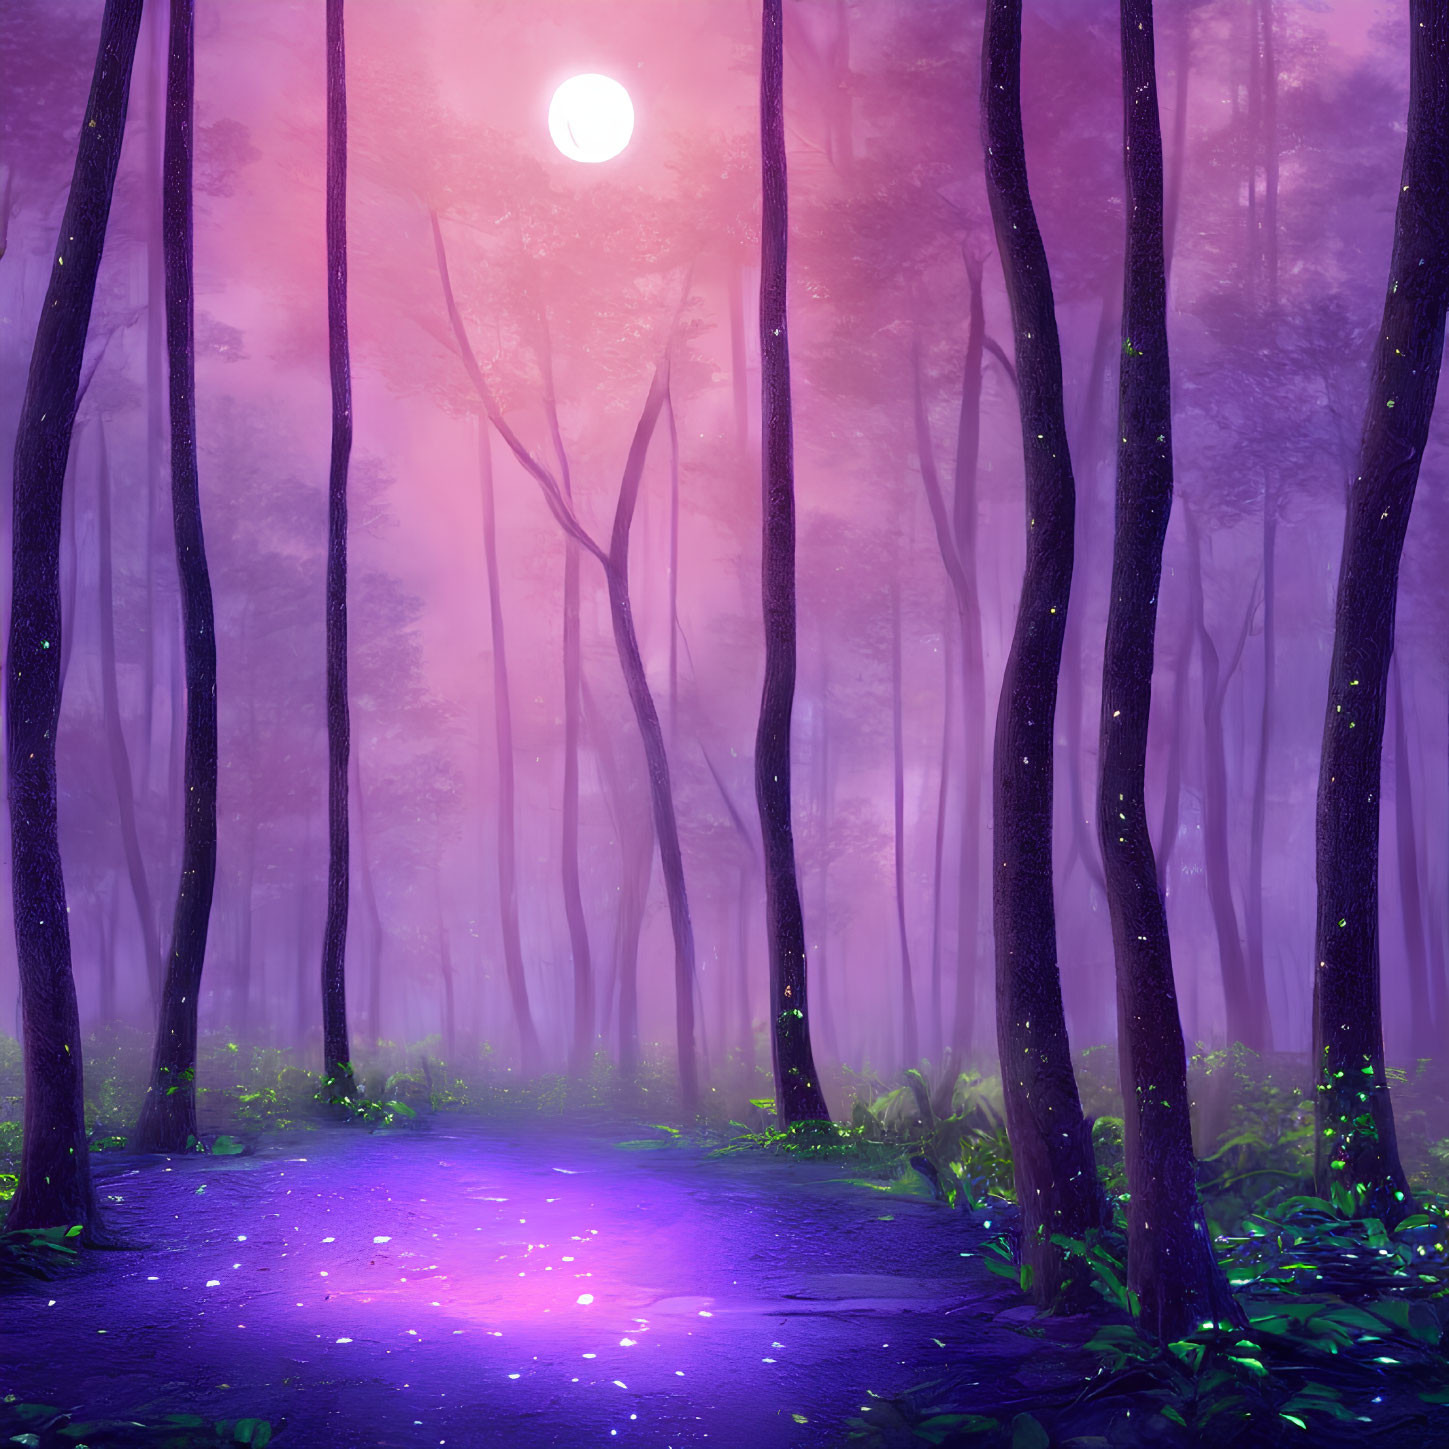 Mystical forest with tall trees, purple fog, luminous path, and bright moon